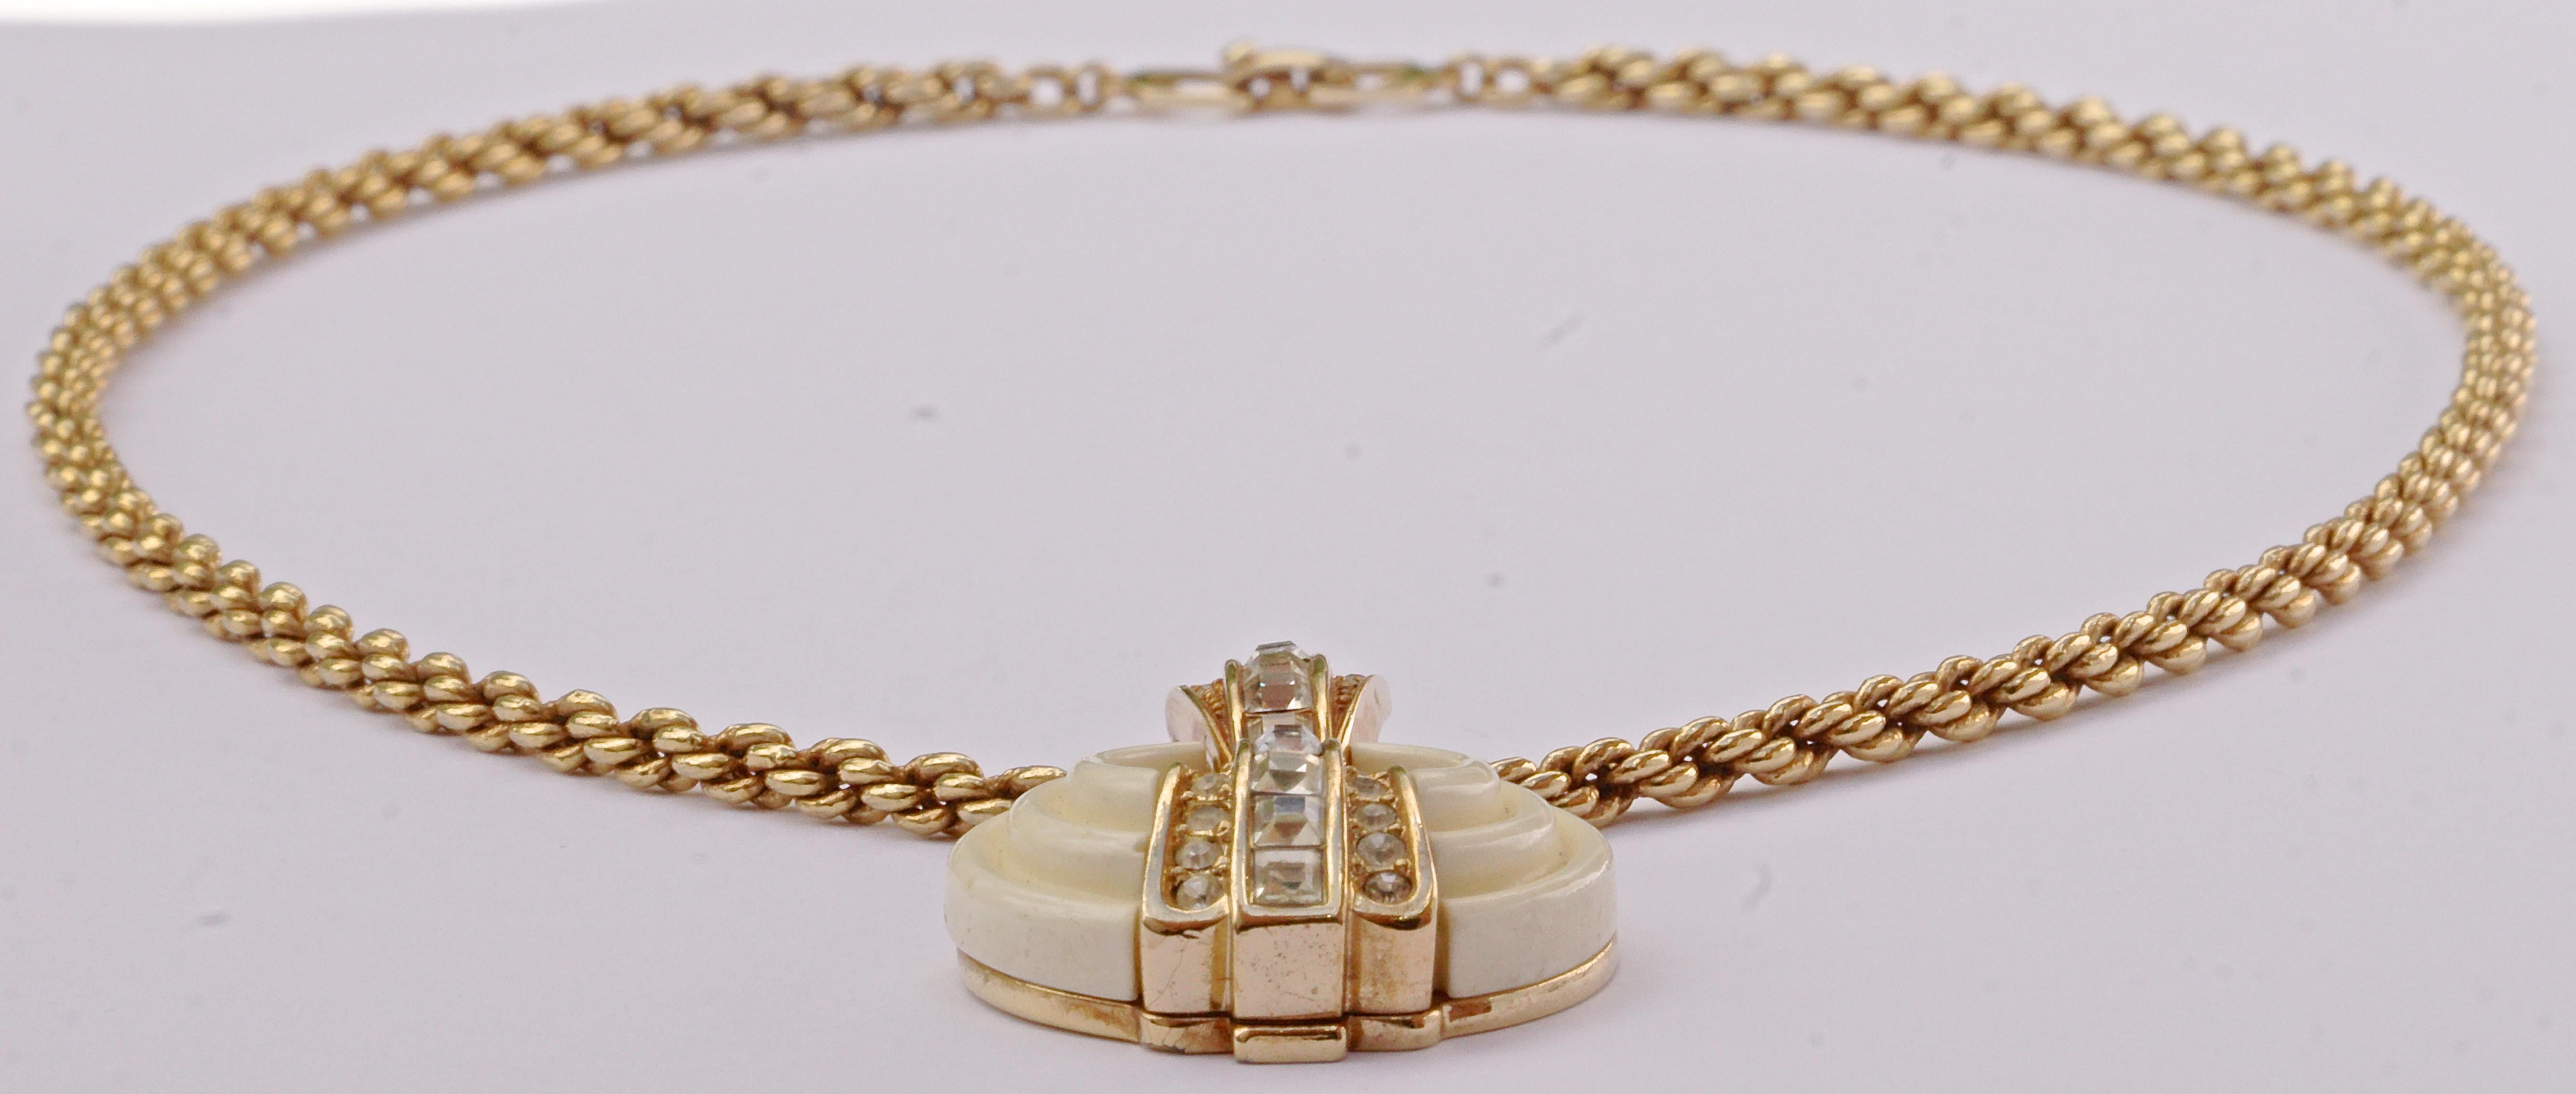 Women's Grosse Gold Plated Link Necklace with a Round Cream and Rhinestone Pendant 1980s For Sale